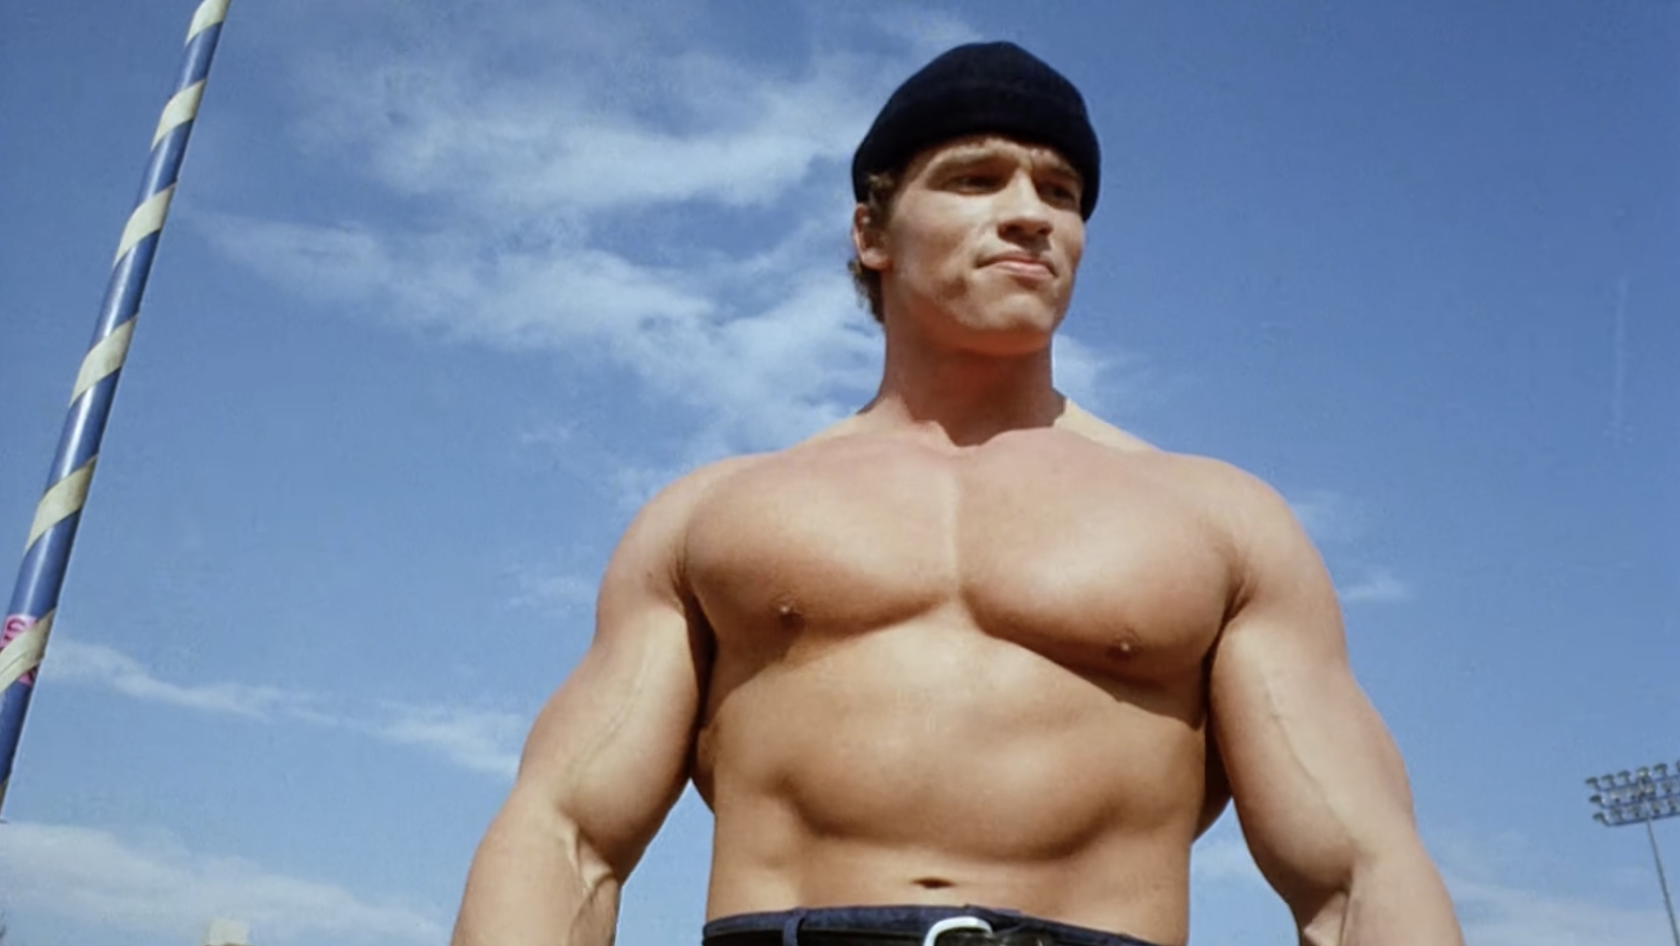 A young, shirtless, and very buff Arnold Schwarzenegger stands outdoors on a sport field wearing a beanie